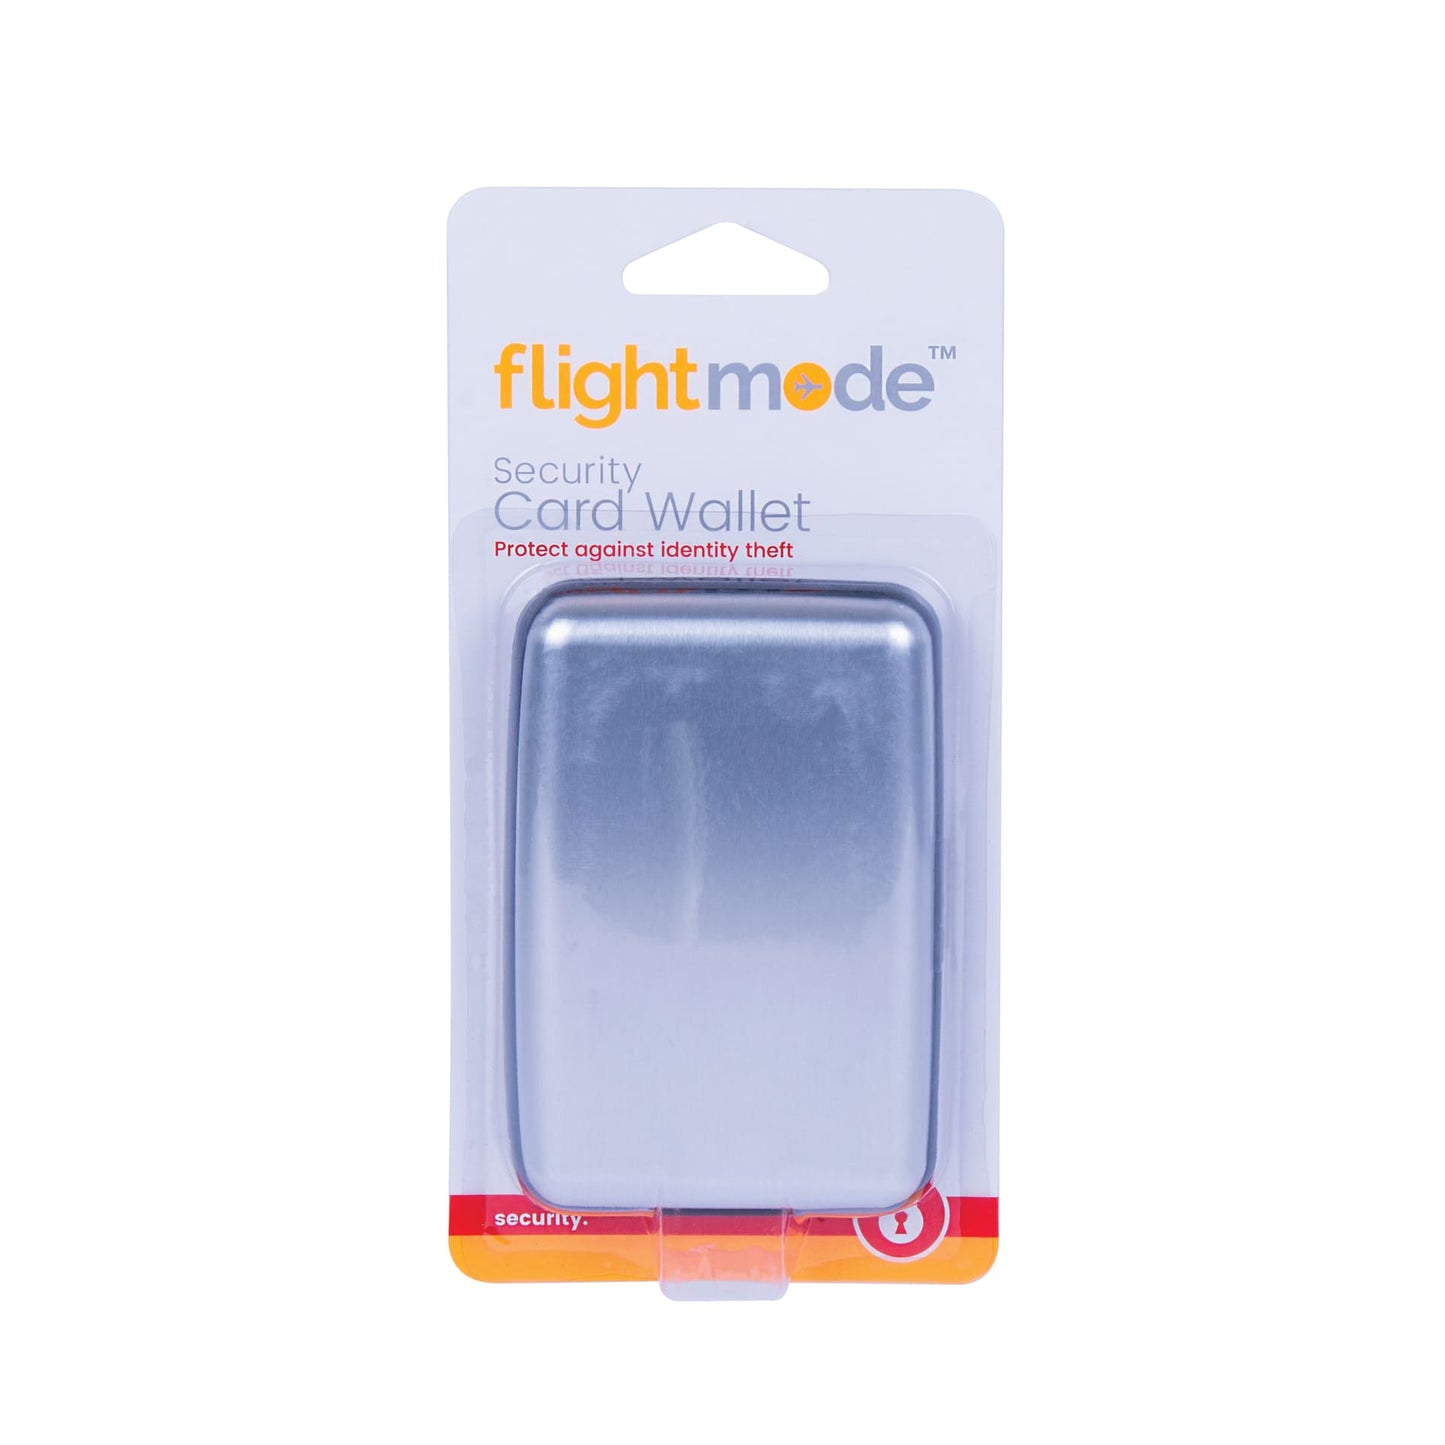 Flightmode Security Card Wallet - Designed for carrying your credit card and cash, it’s the perfect security device for travellers. It has 6 expandable pockets, and ABS plastic interior, PVC dividers and a strong and durable aluminium outer shell. Available in black and silver.